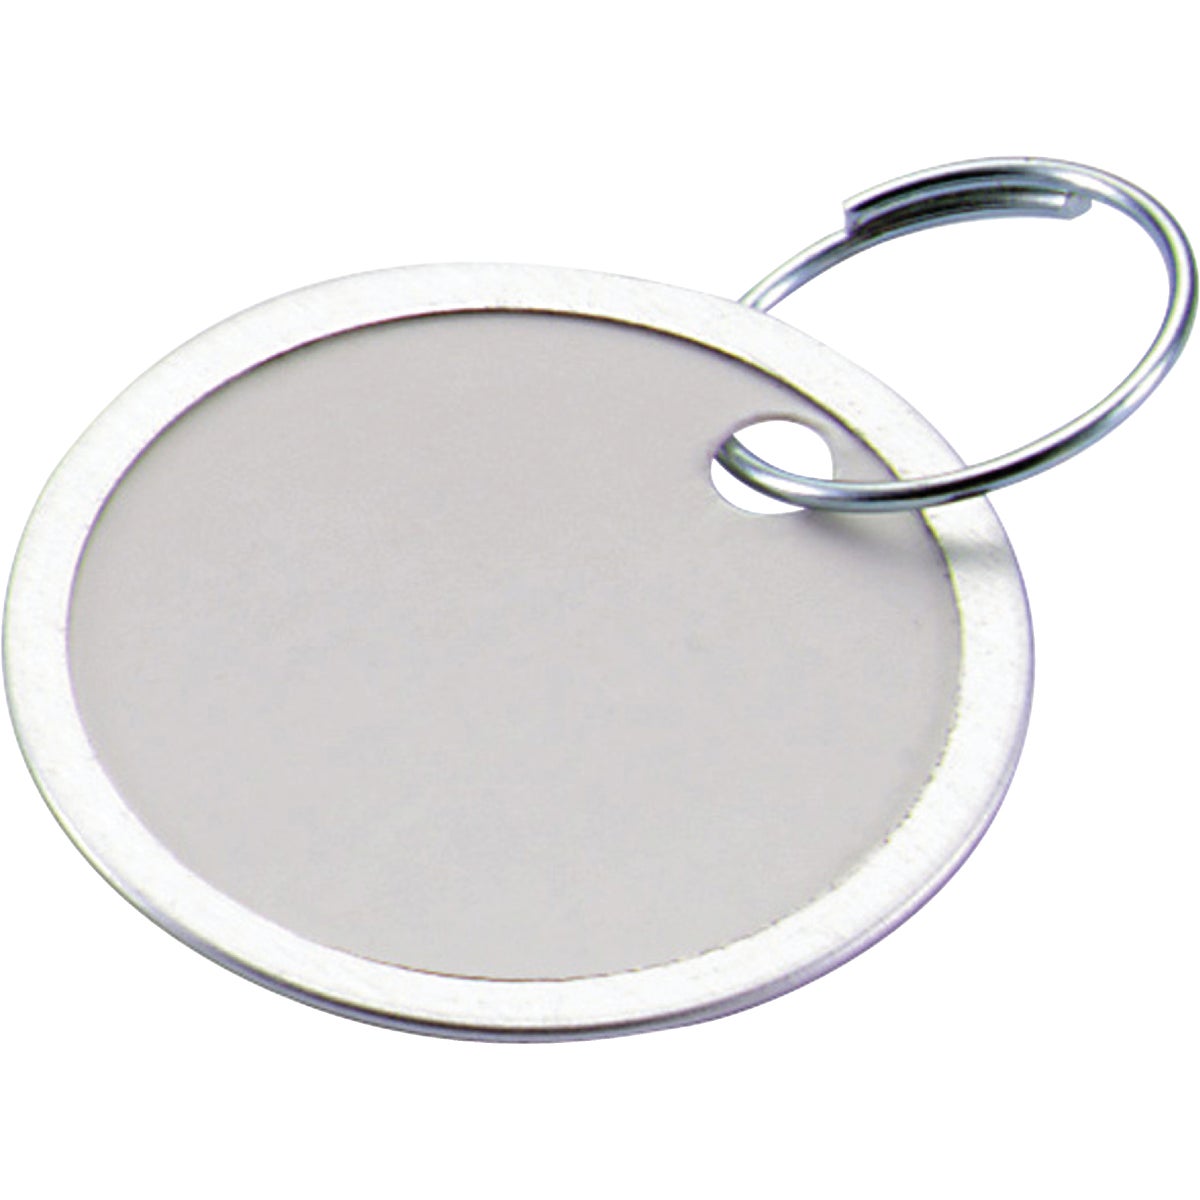 Item 574569, Sturdy anodized metal-rimmed white coated paper tags.